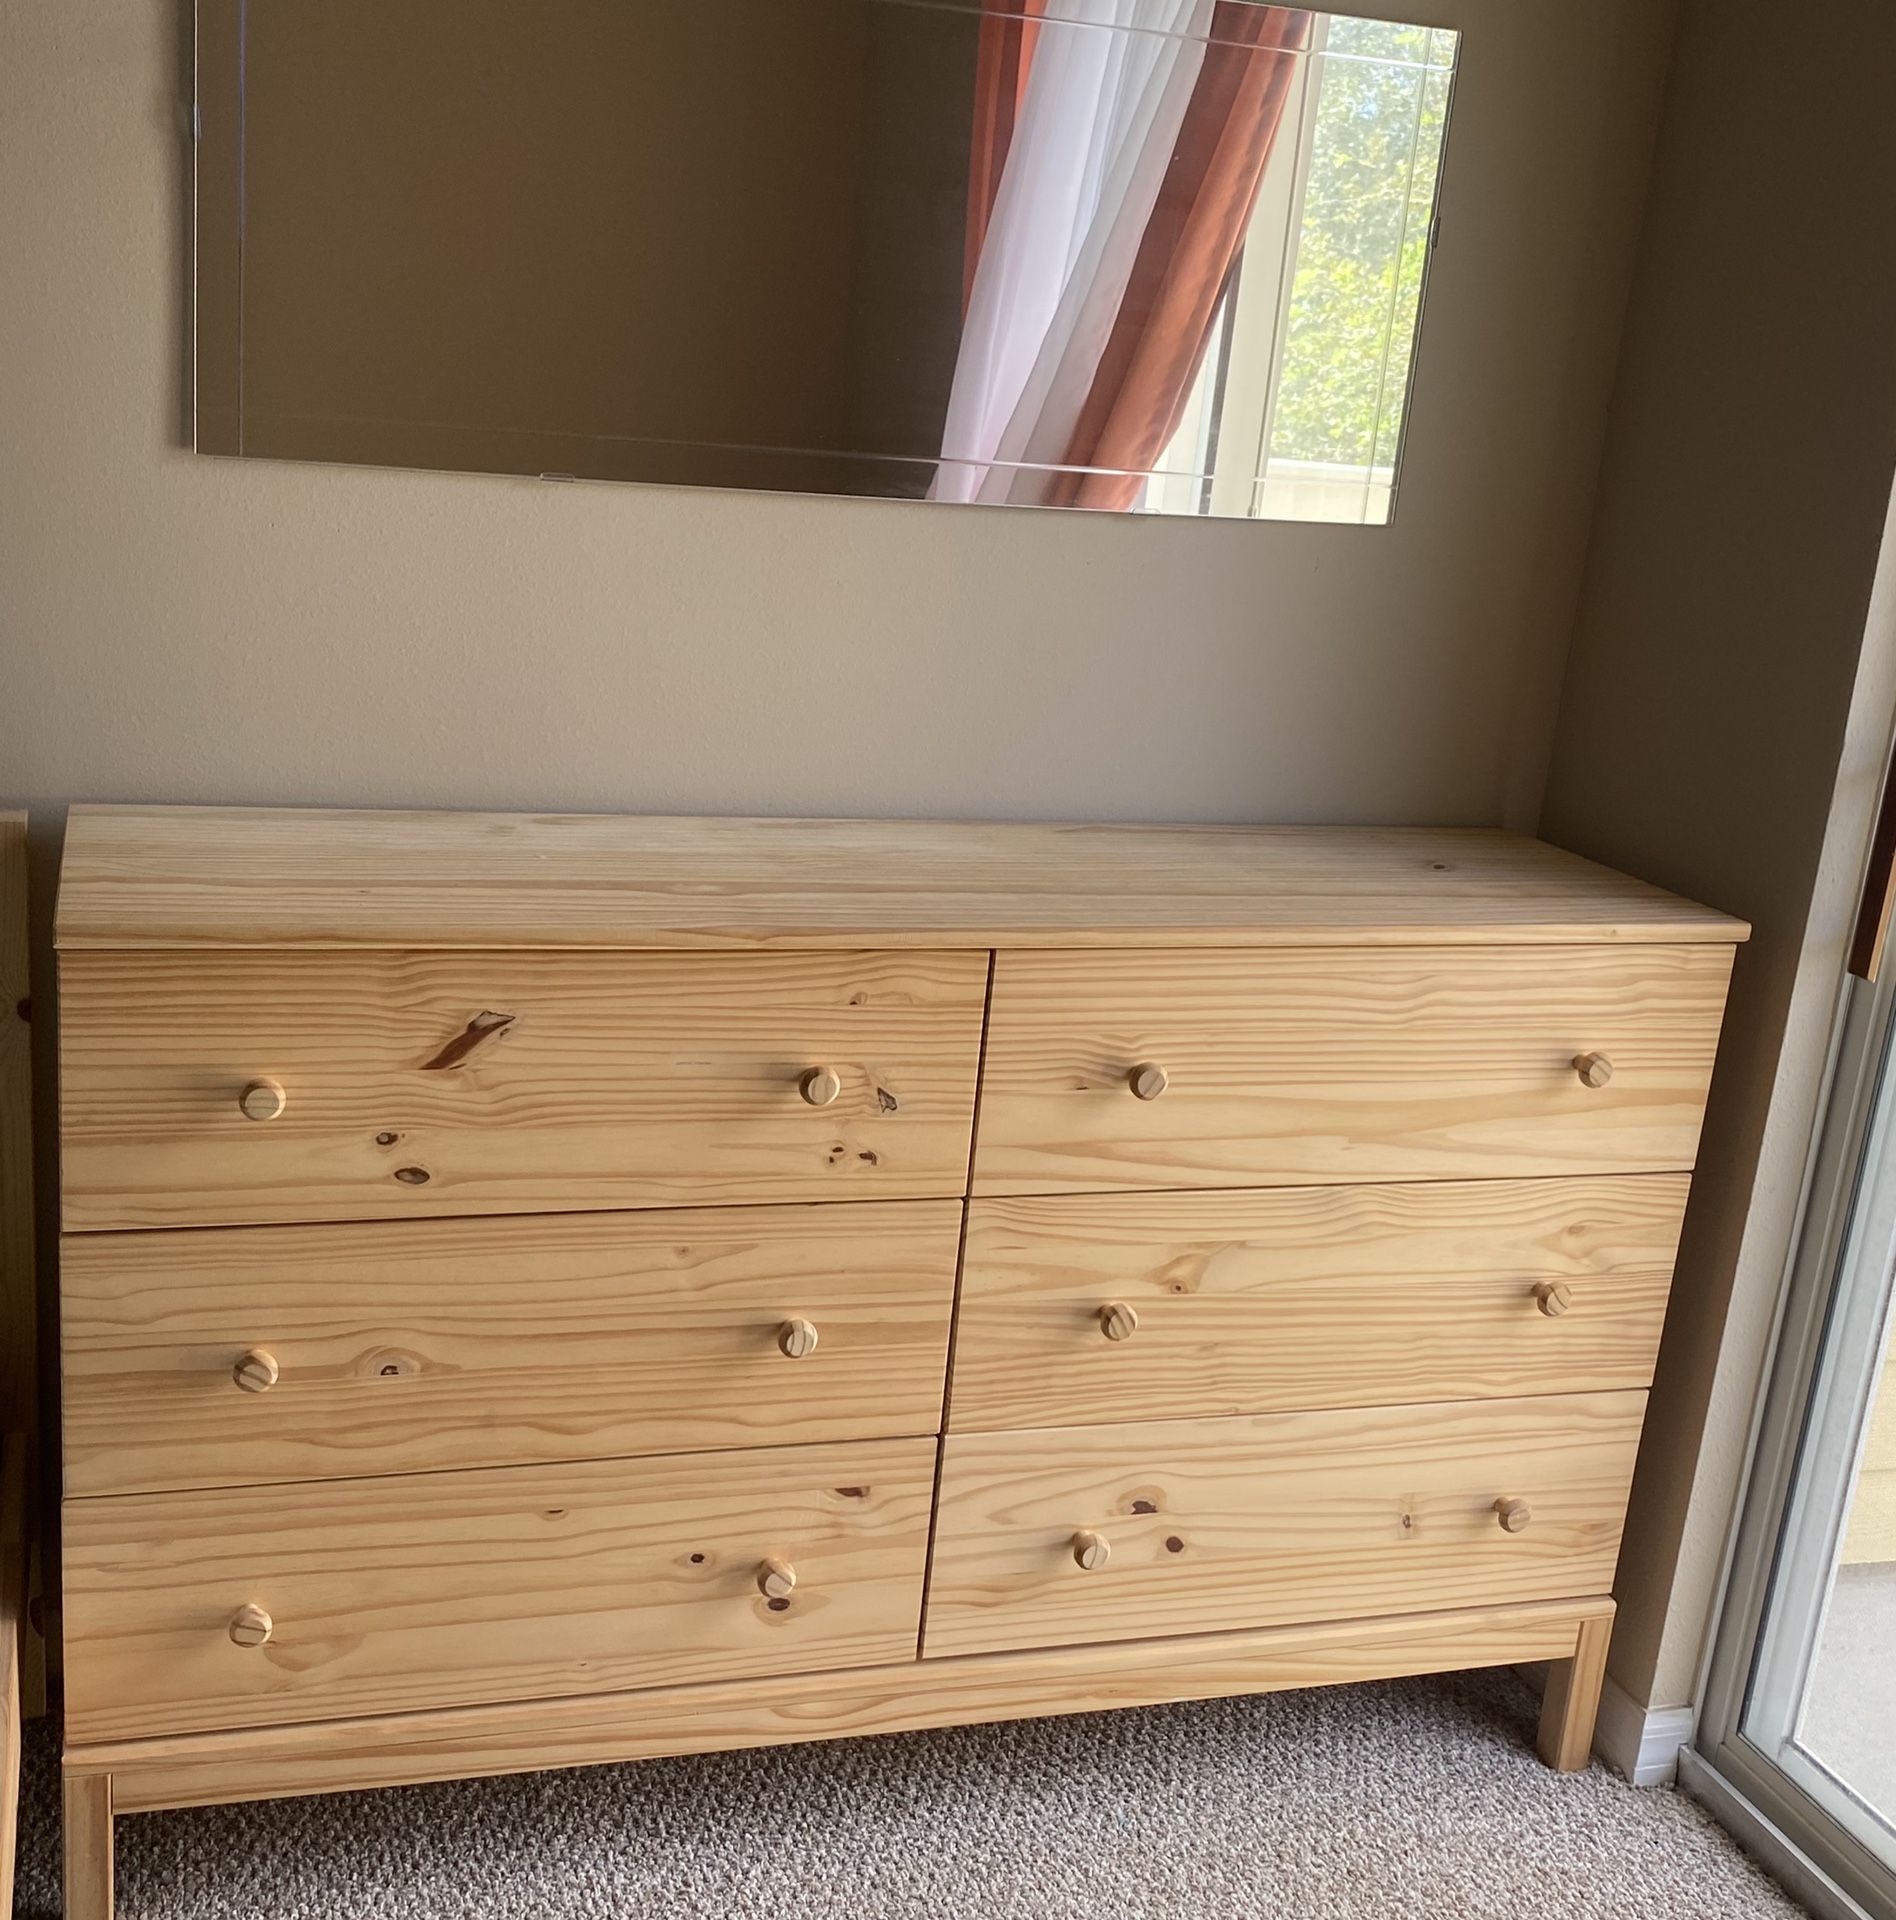 FREE. IKEA Full bed, Dresser and mirror